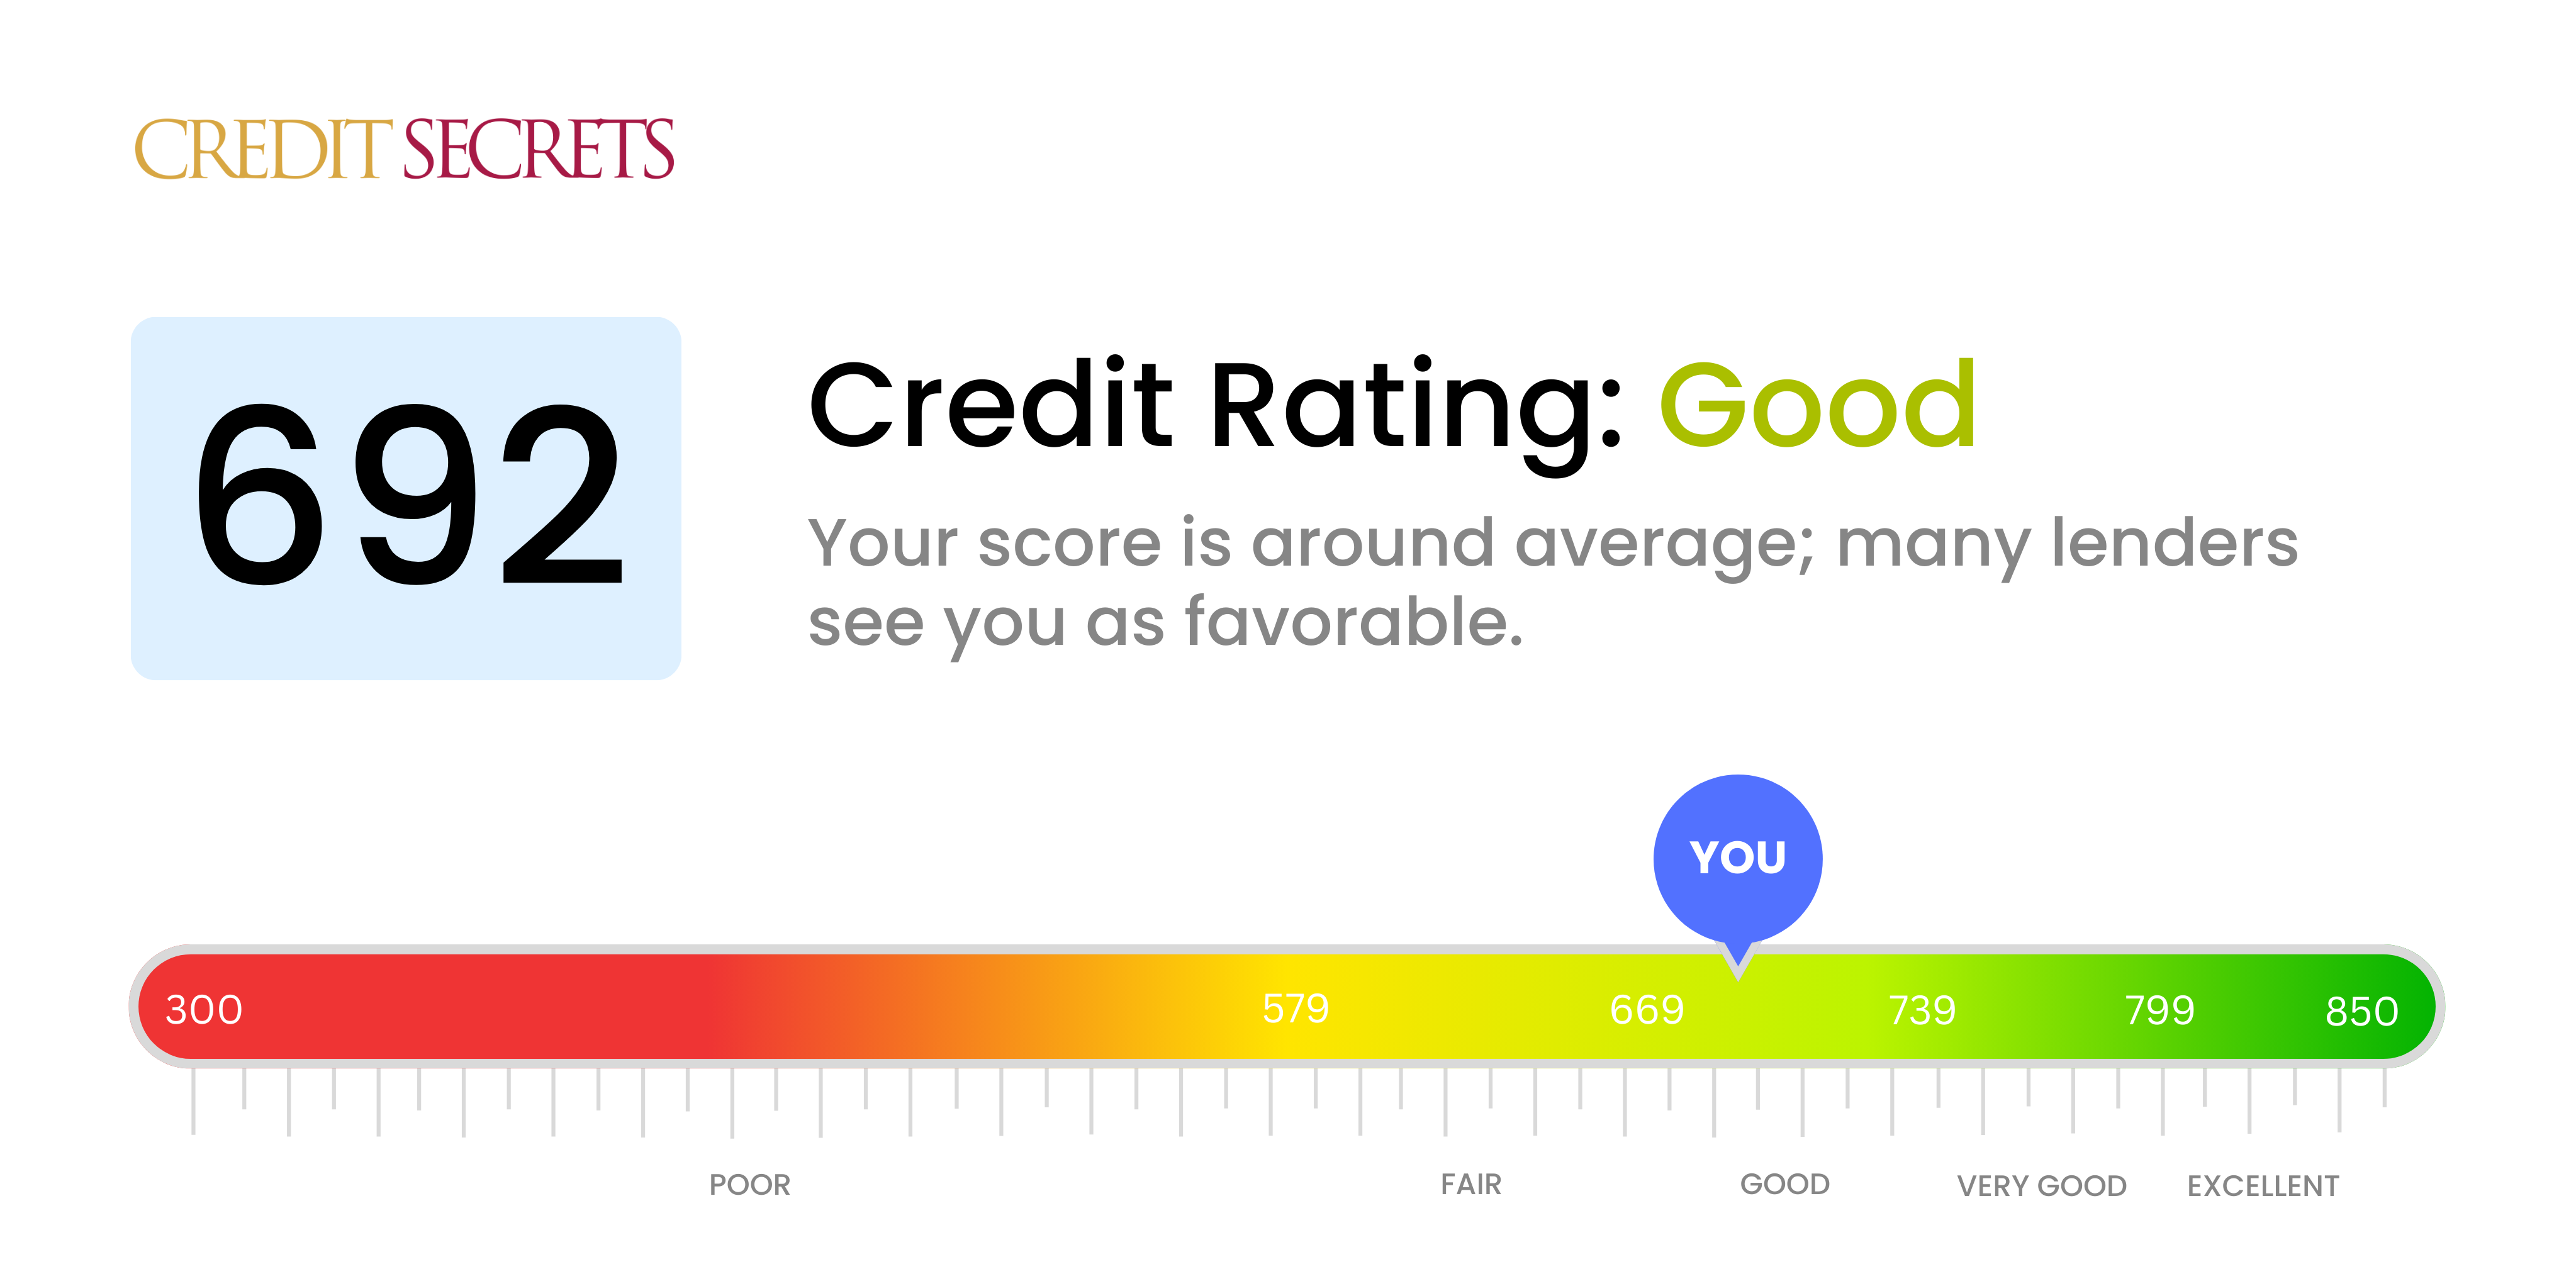 Is 692 a good credit score?